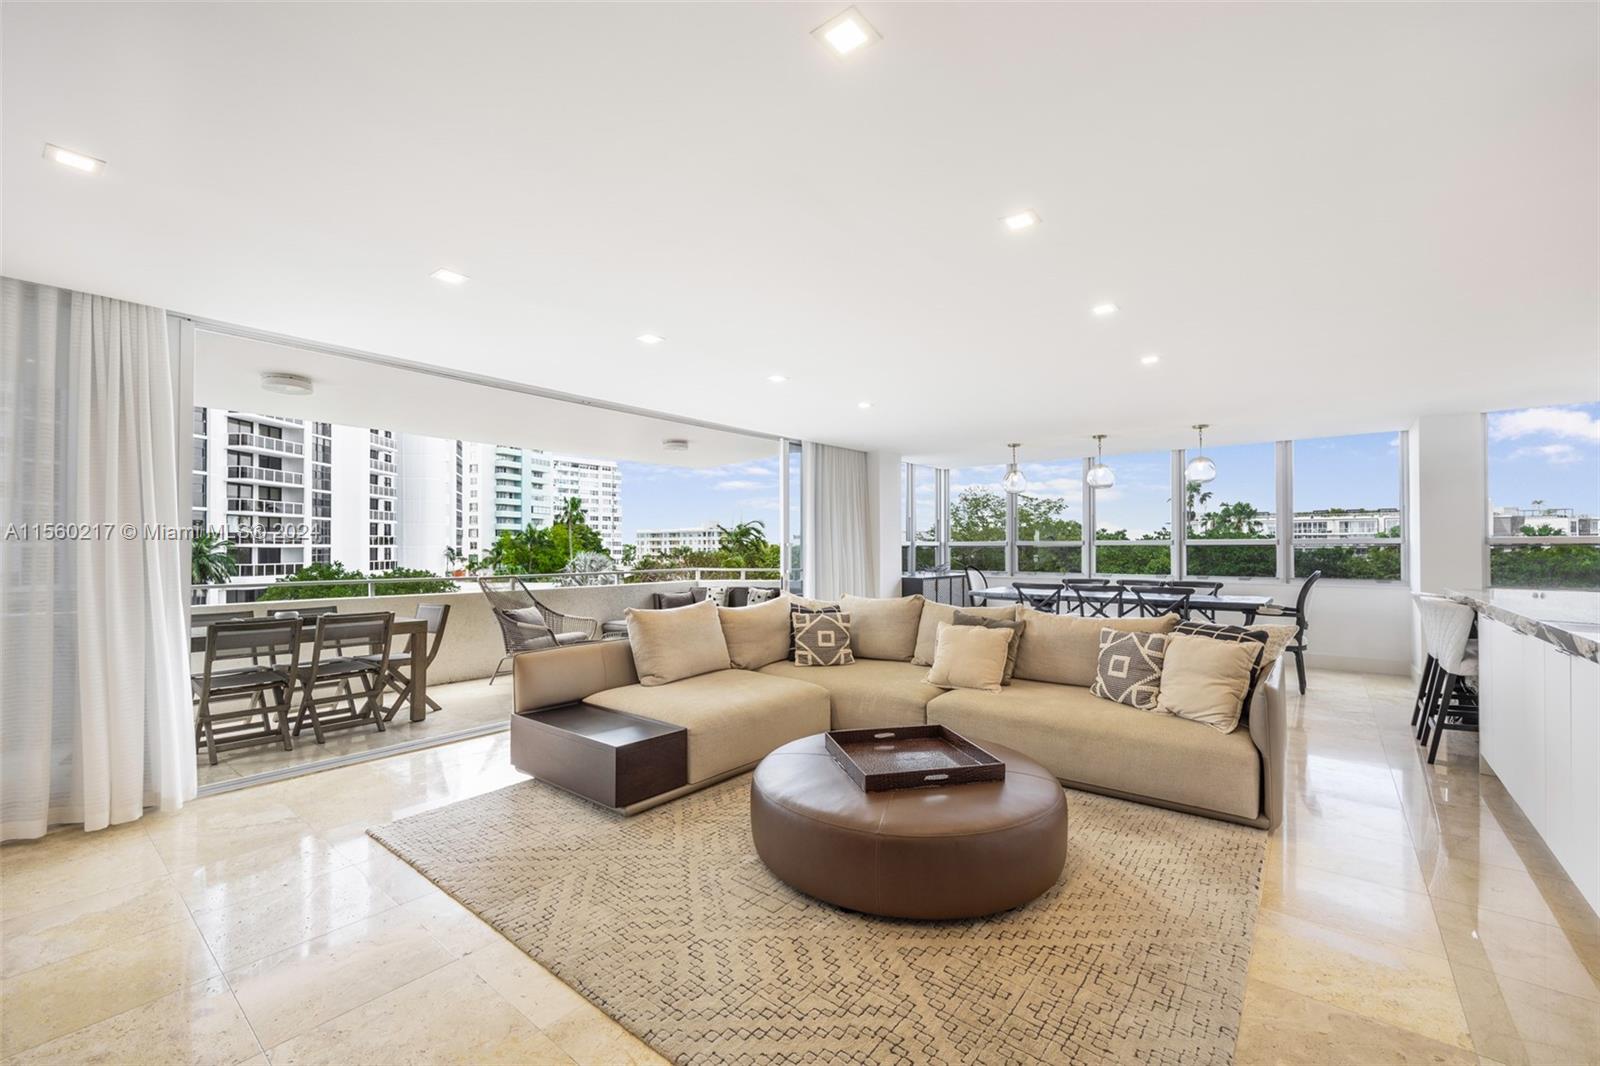 11 Island Ave Unit 411, Miami Beach, Florida, 33139, United States, 2 Bedrooms Bedrooms, ,3 BathroomsBathrooms,Residential,For Sale,11 Island Ave Unit 411,1498844